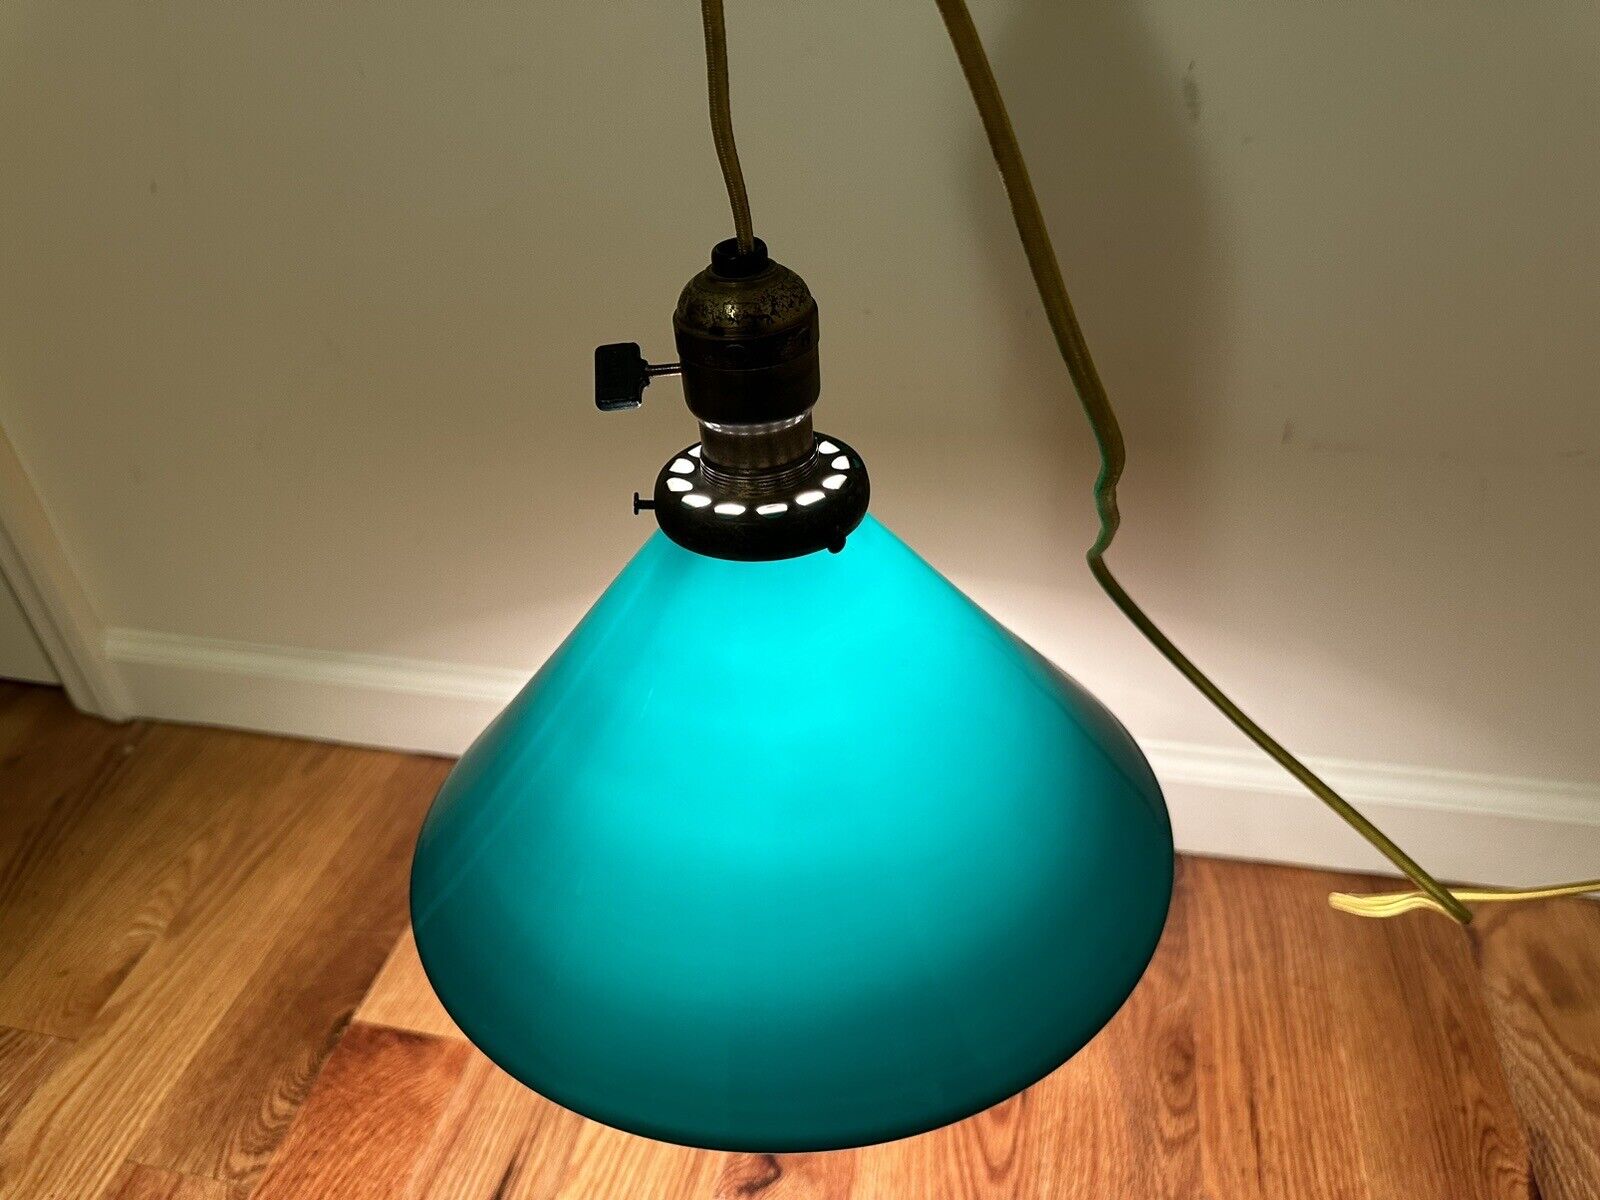 Vintage Emeralite Lamp Antique Hanging Green Glass Light Electric Plug Rewired